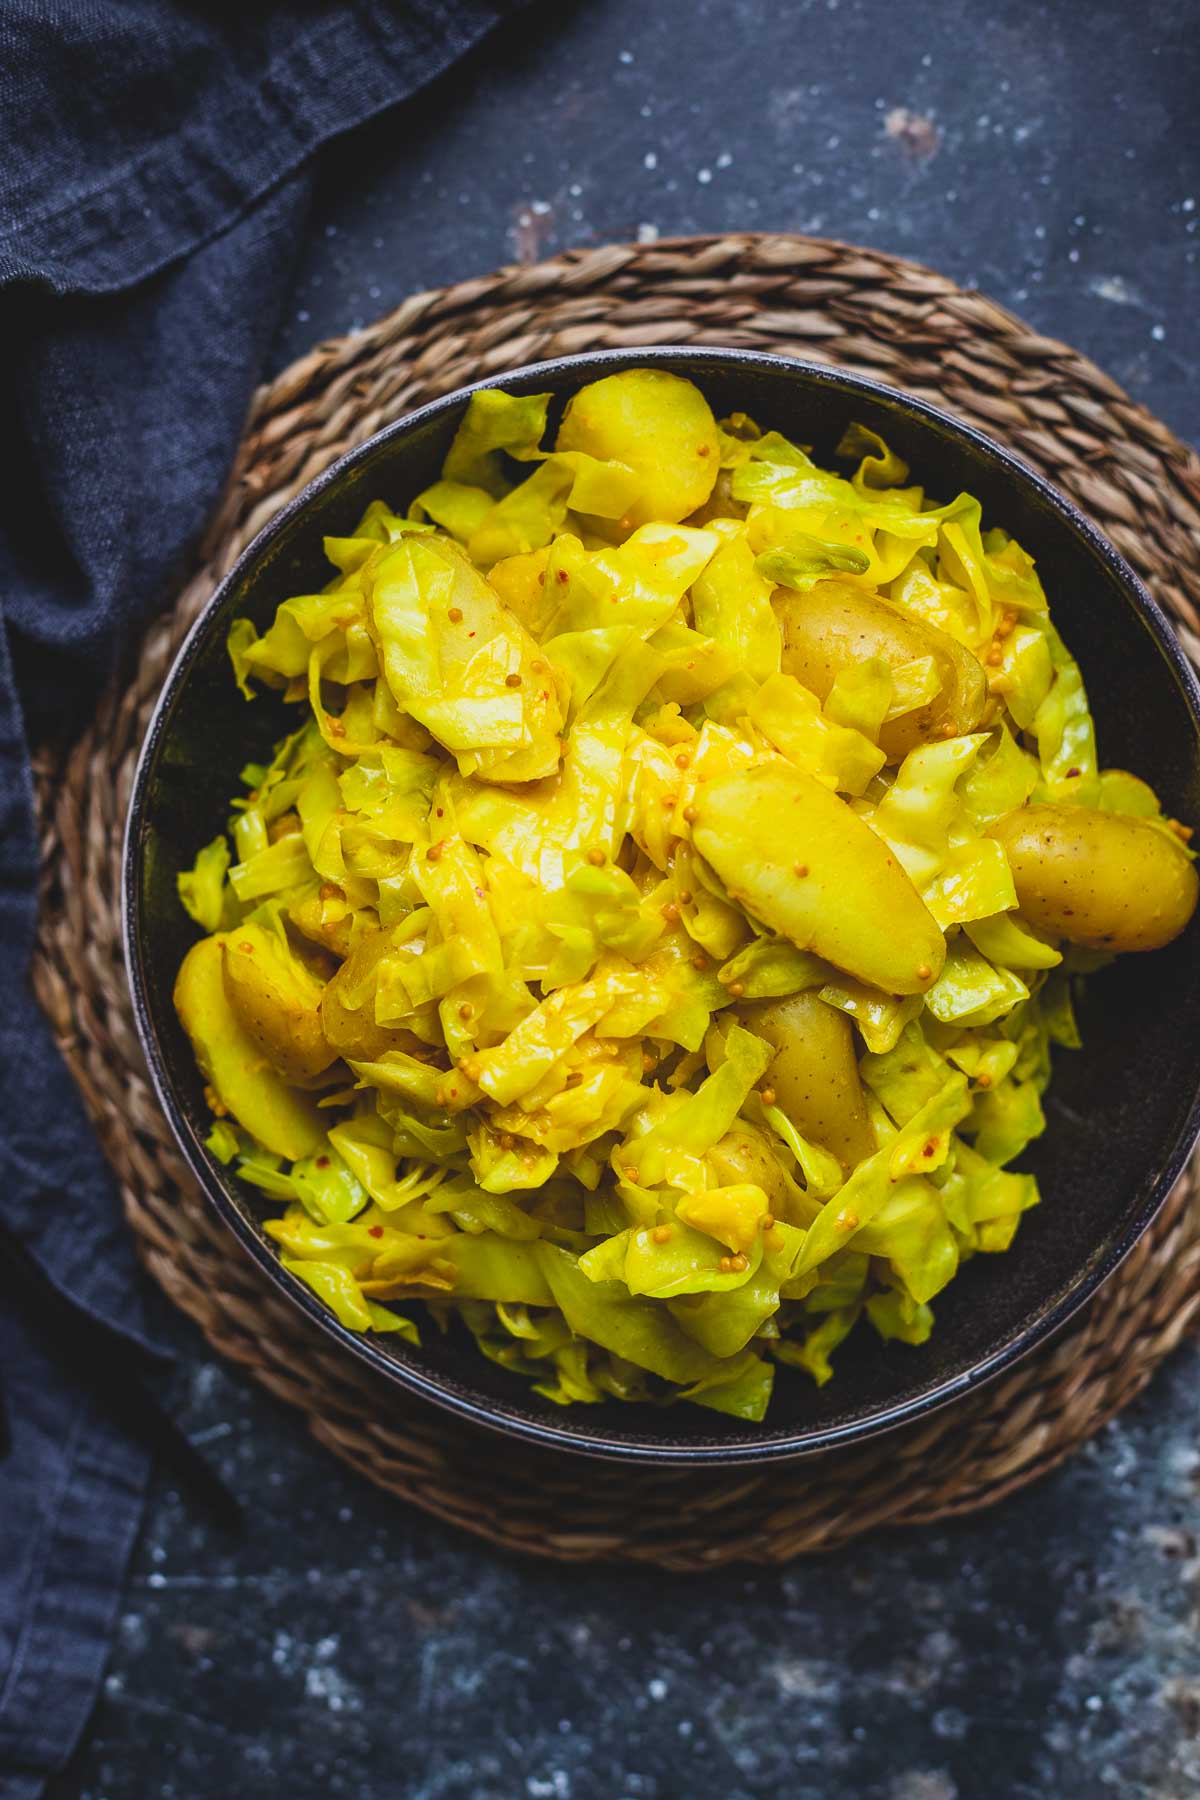 Pointed Cabbage Stir-fry with Potatoes (Bengali-Style)